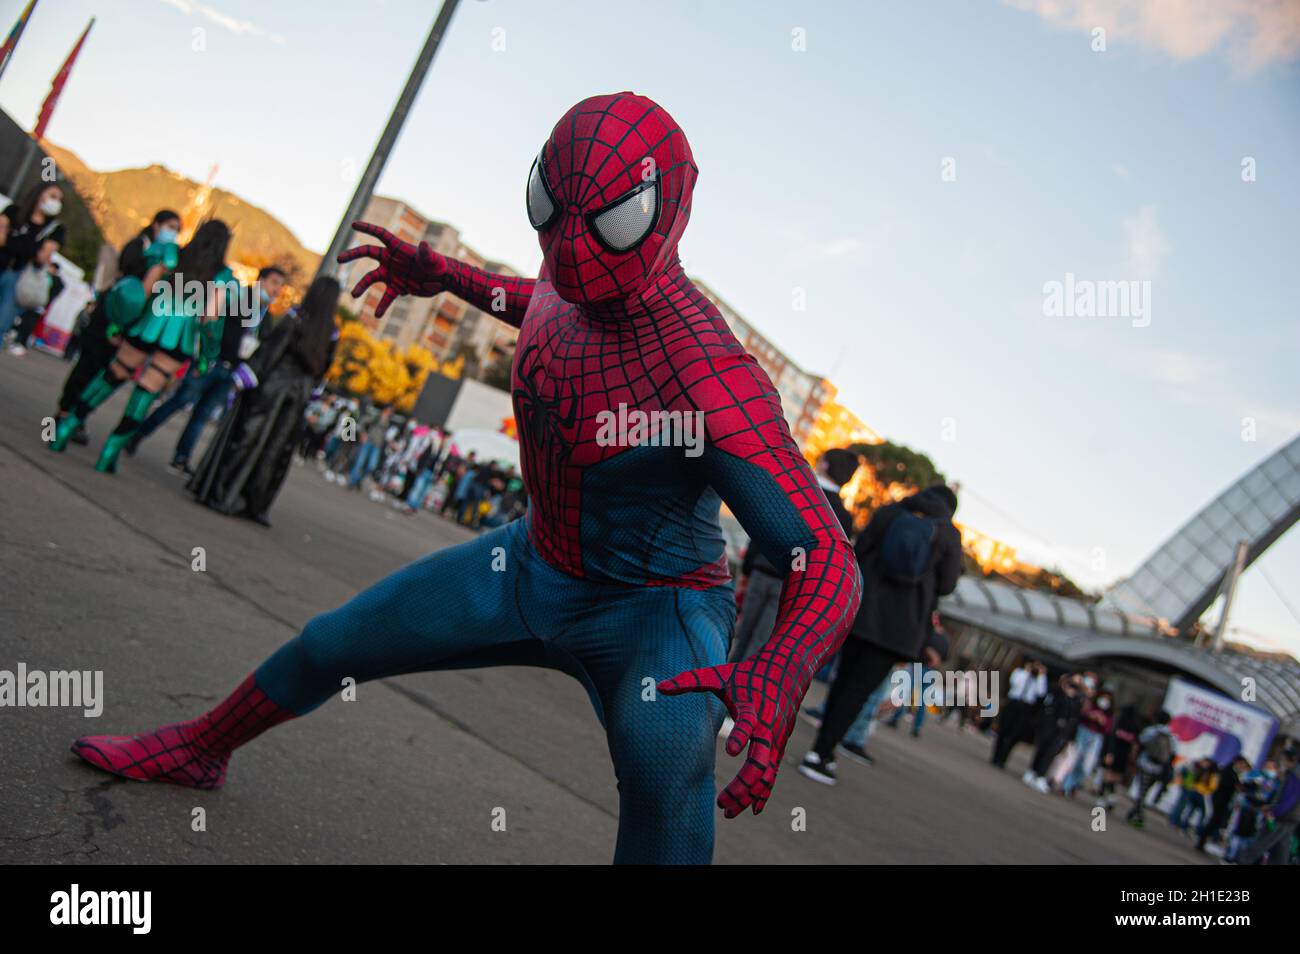 A fan of Marvel superhero Spider Man poses for a photo during the fourth day of the SOFA (Salon del Ocio y la Fantasia) 2021, a fair aimed to the geek Stock Photo